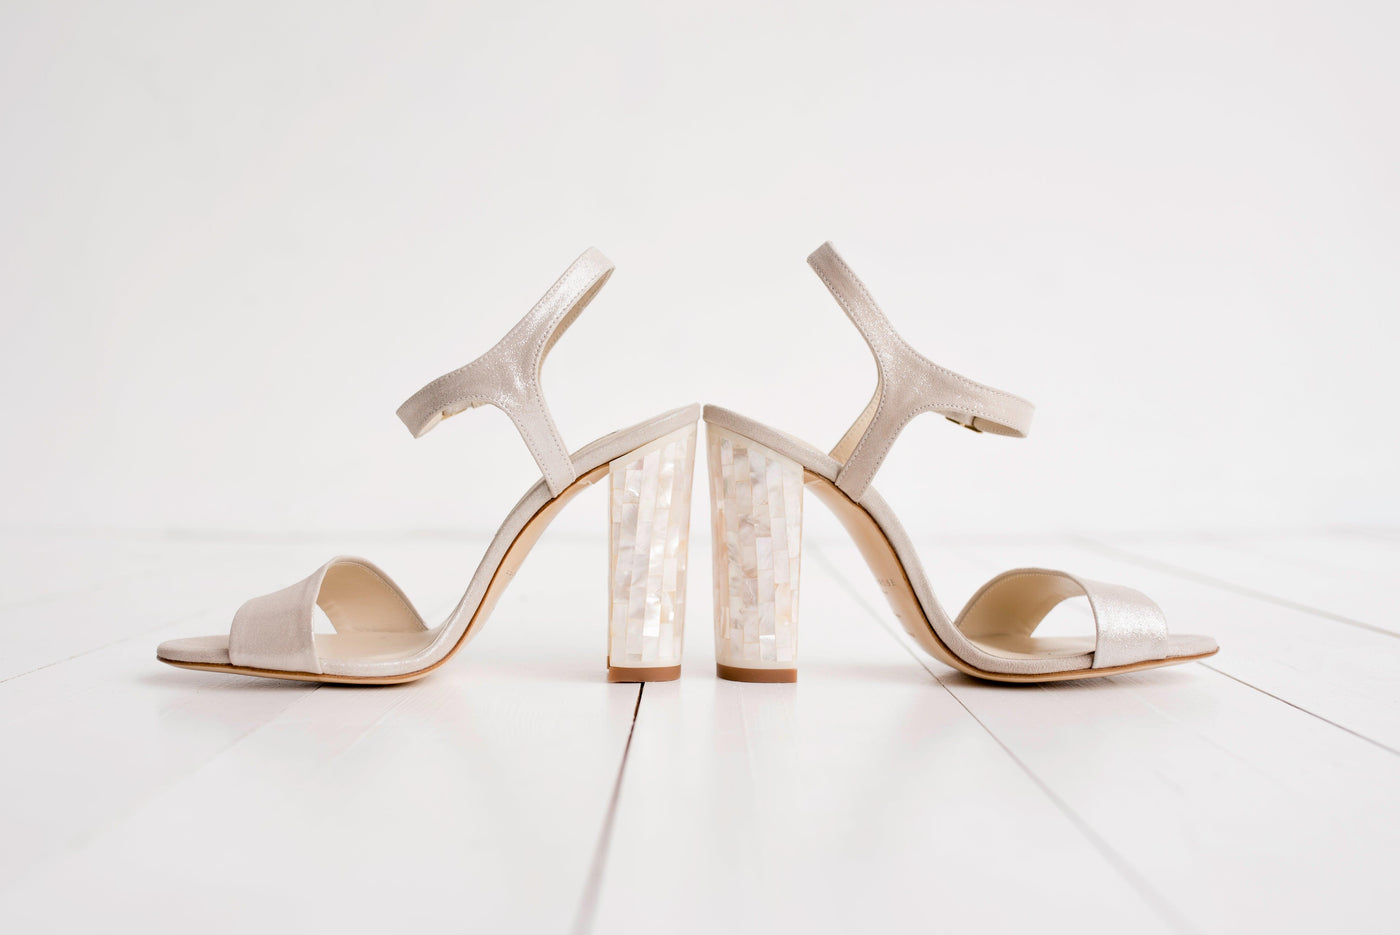 Why Choose Champagne Wedding Shoes?